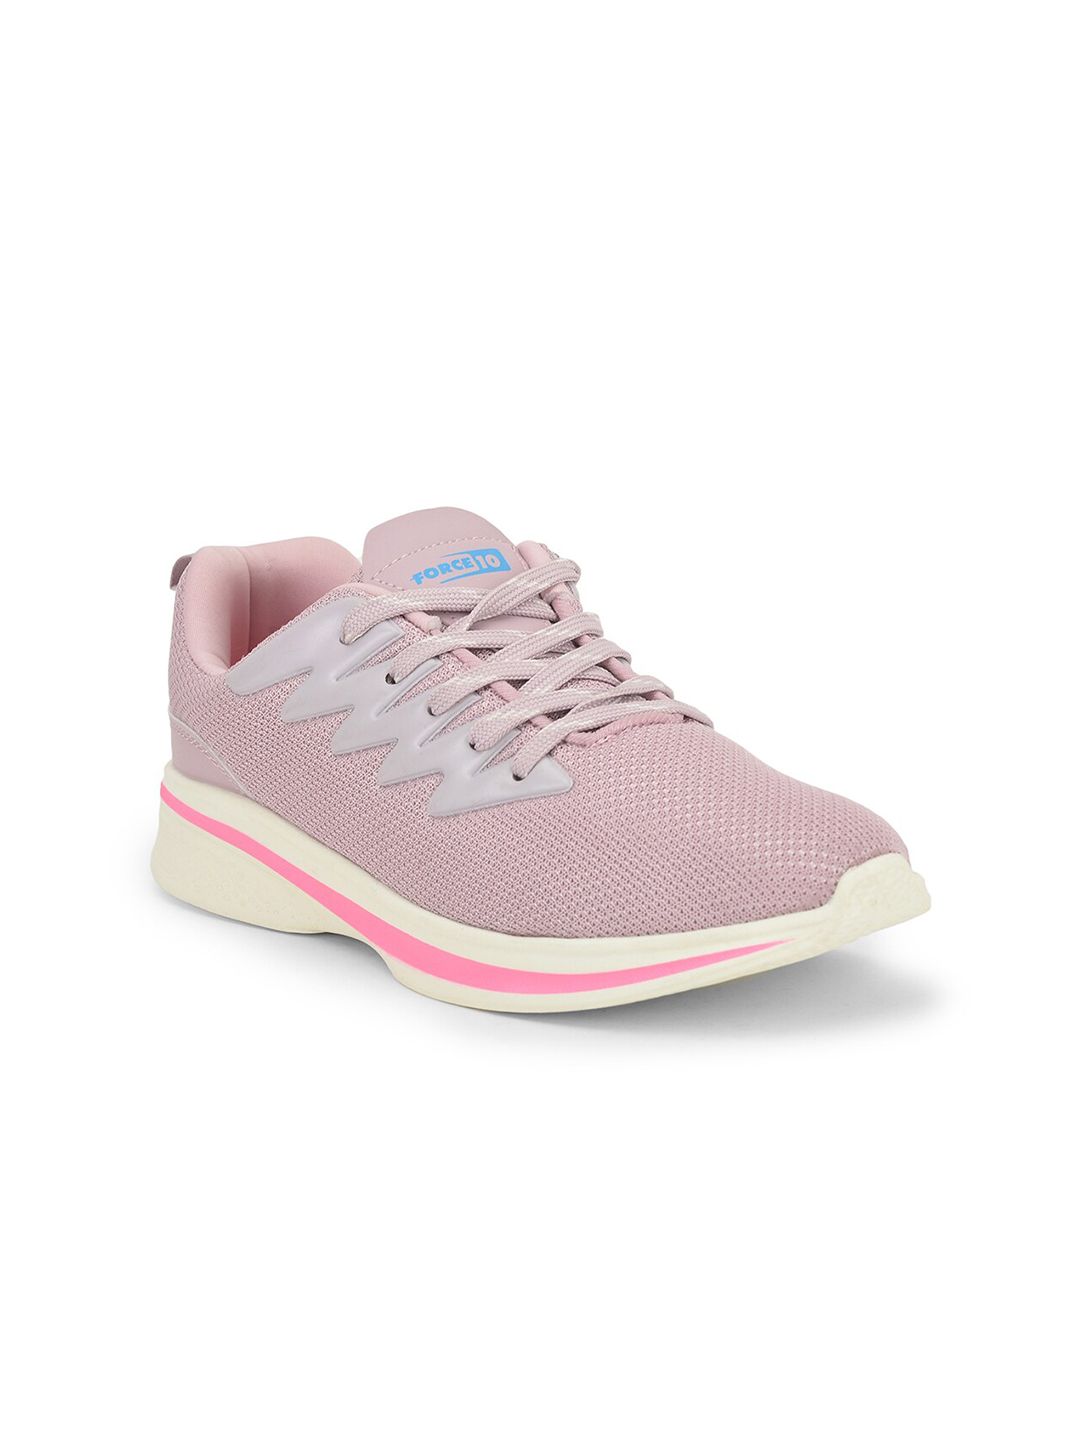 Liberty Women Pink Mesh Running Non-Marking Shoes Price in India